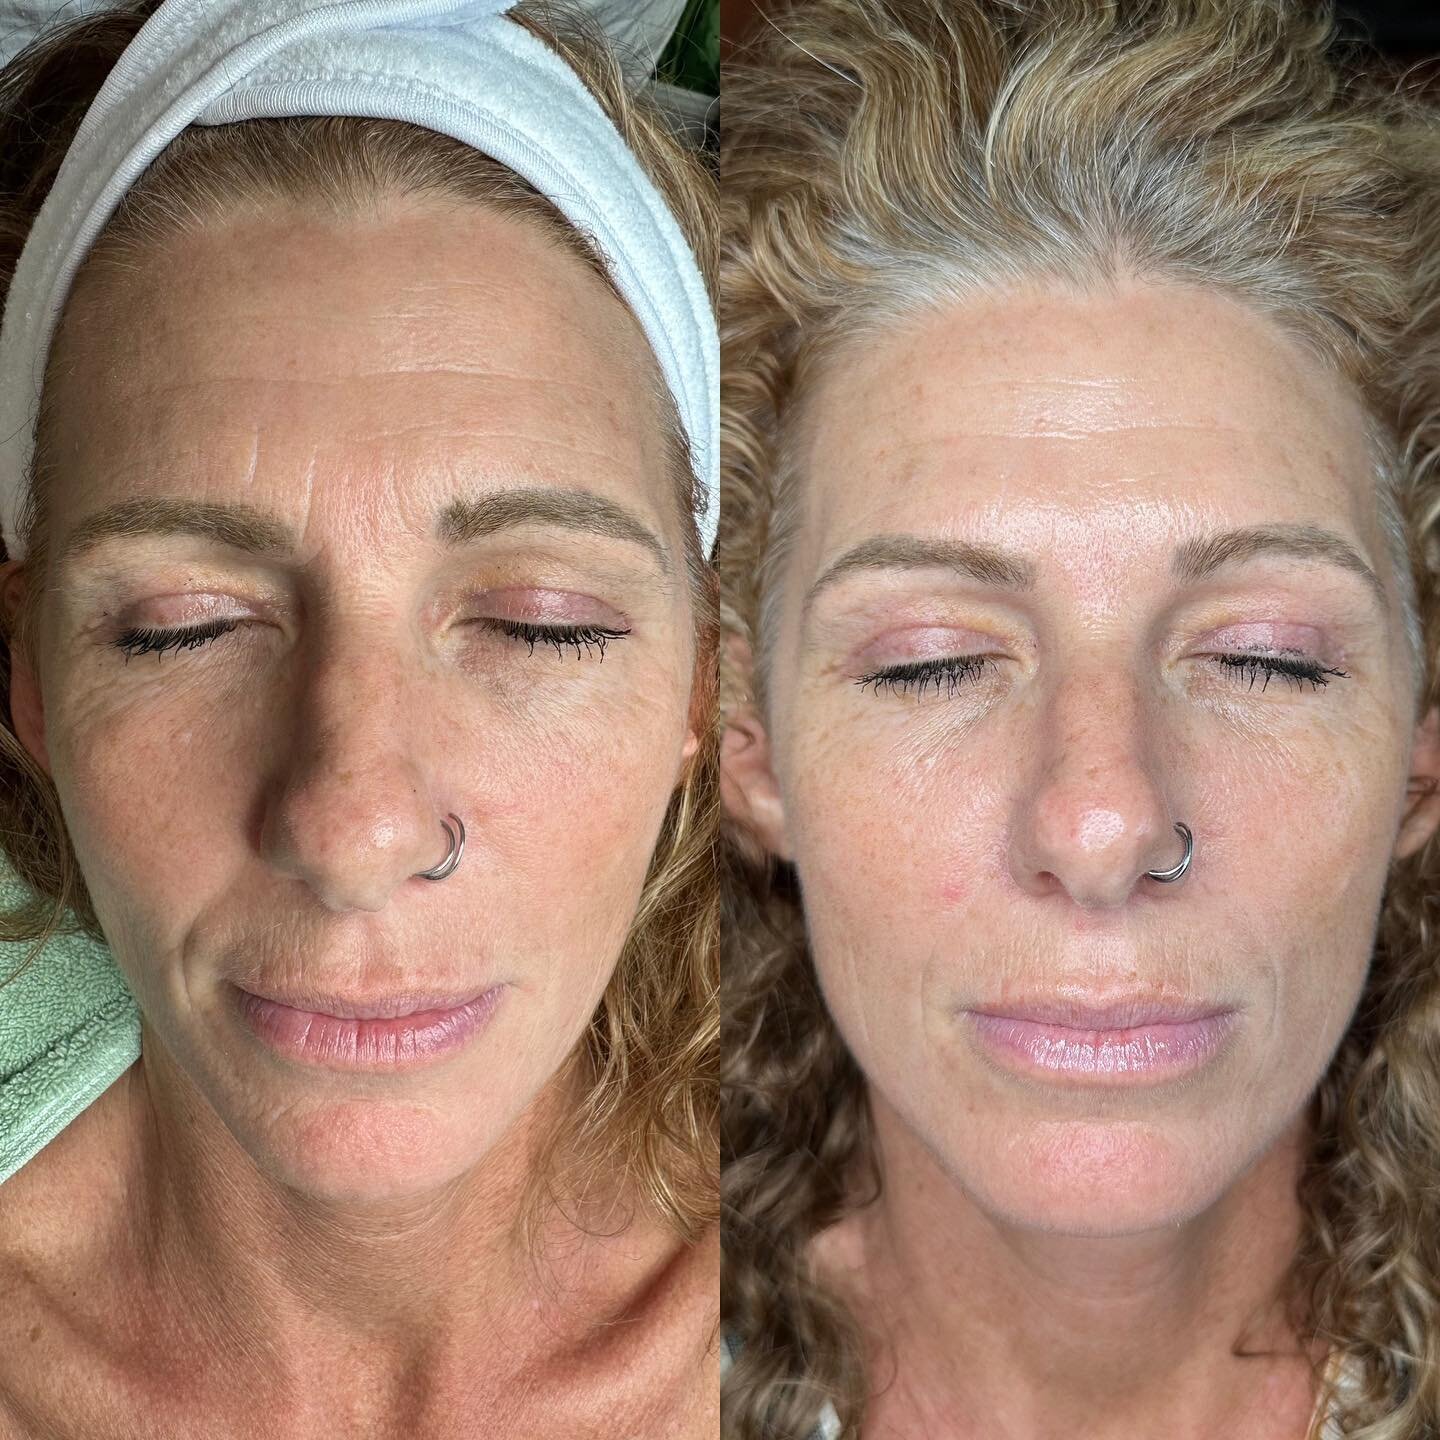 JET PLASMA + Peel 〰️ the proof is in the pics!!

Check out these results after a series of 3 Jet Plasma sessions plus our &lsquo;no downtime&rsquo; Peel from Italy 🤩🤩

Look at the improvement of fine lines, hyperpigmentation, and overall brightness